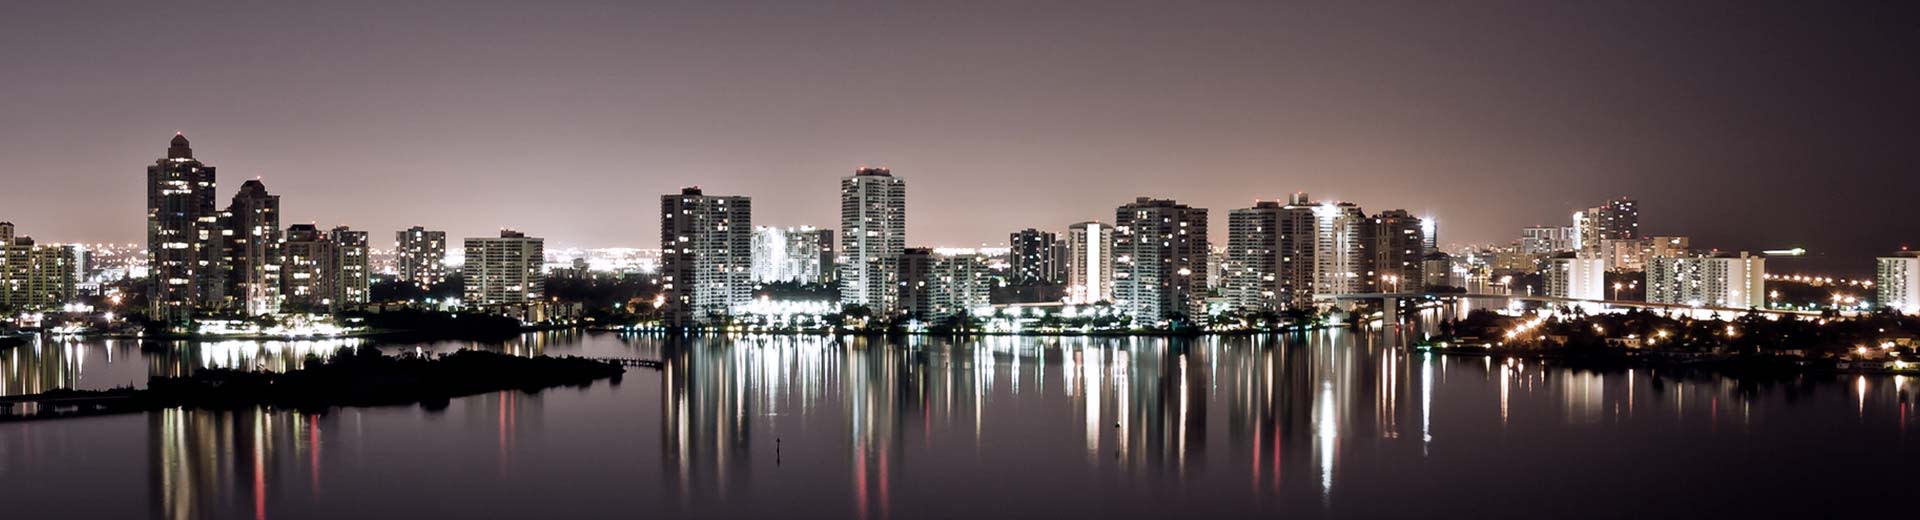 At nighttime the skyline of Fort Lauderdale lights up the sky.